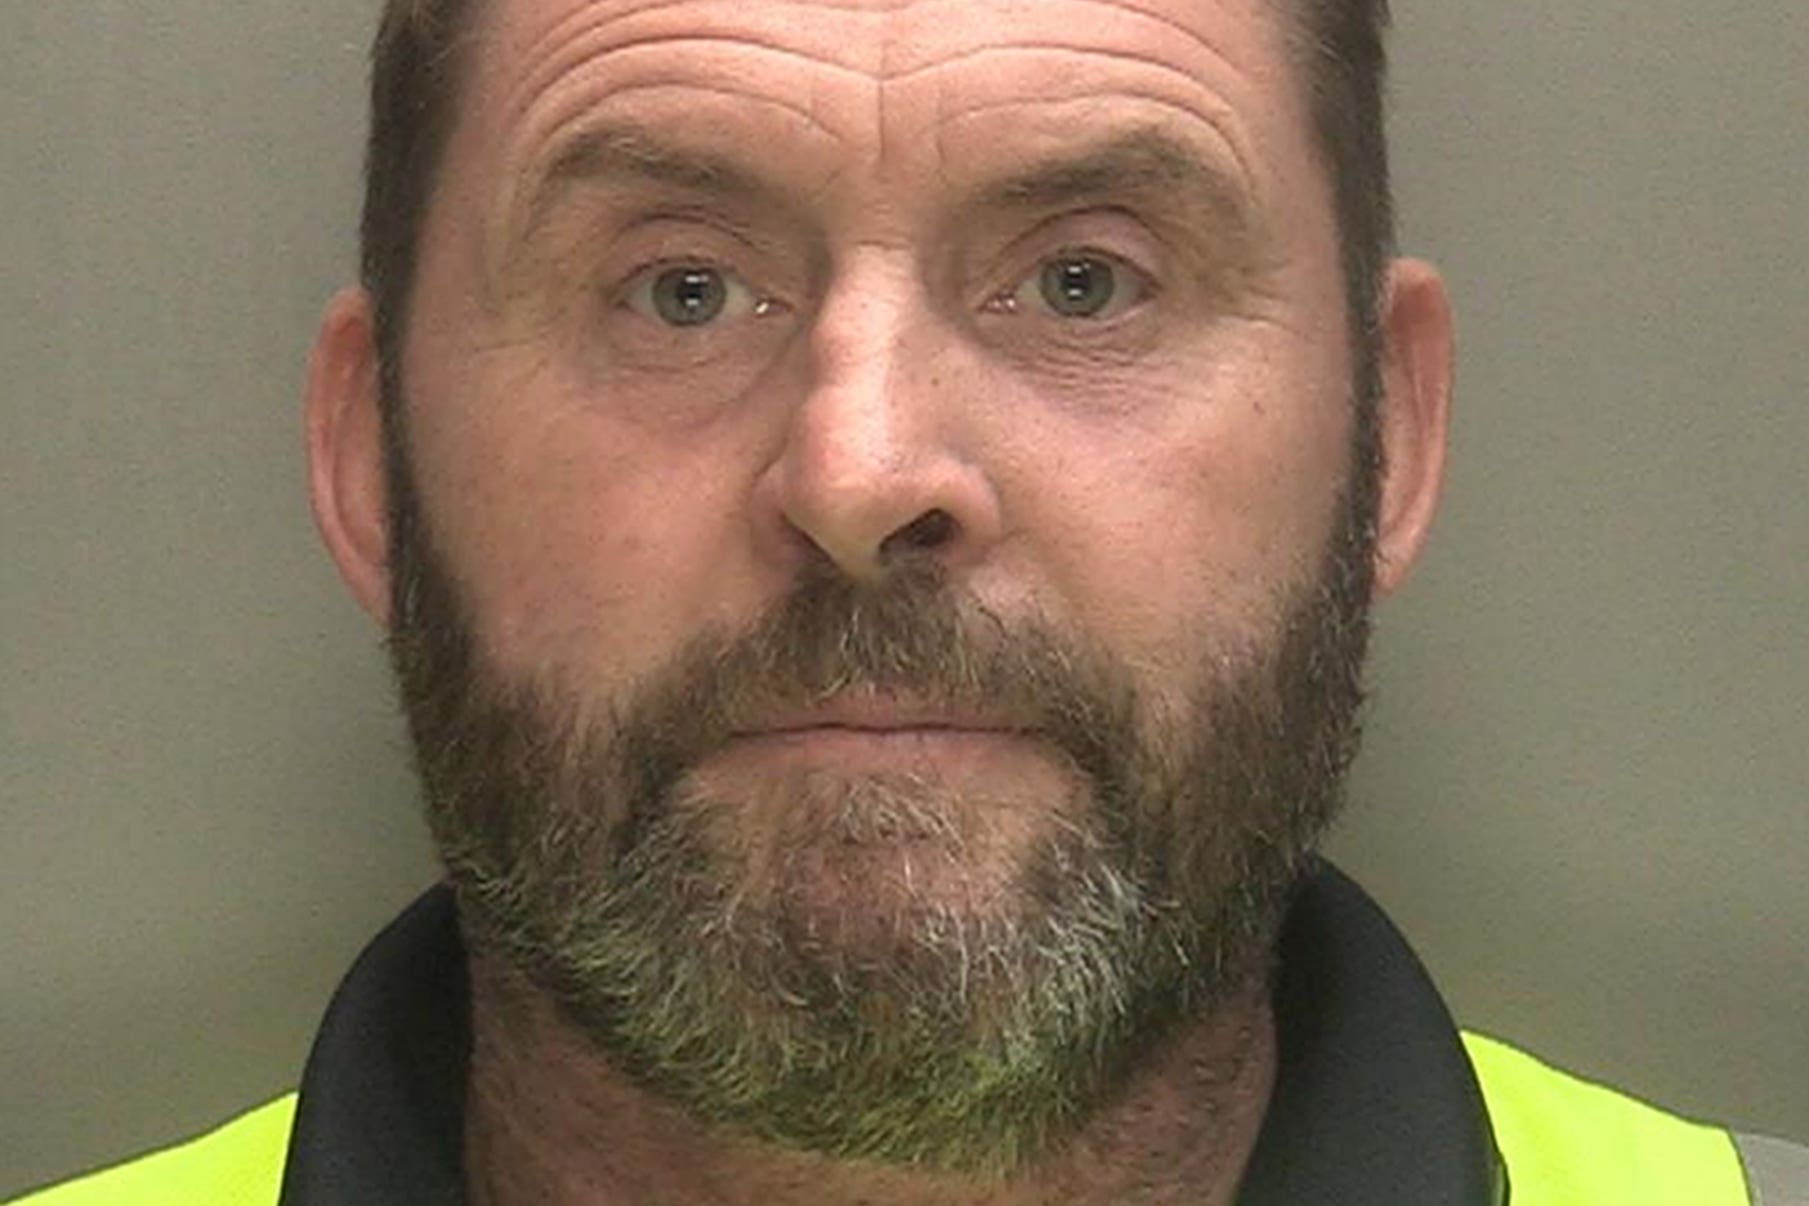 Brian Timmins has been jailed over the death of a man in a shredder (West Midlands Police/PA)